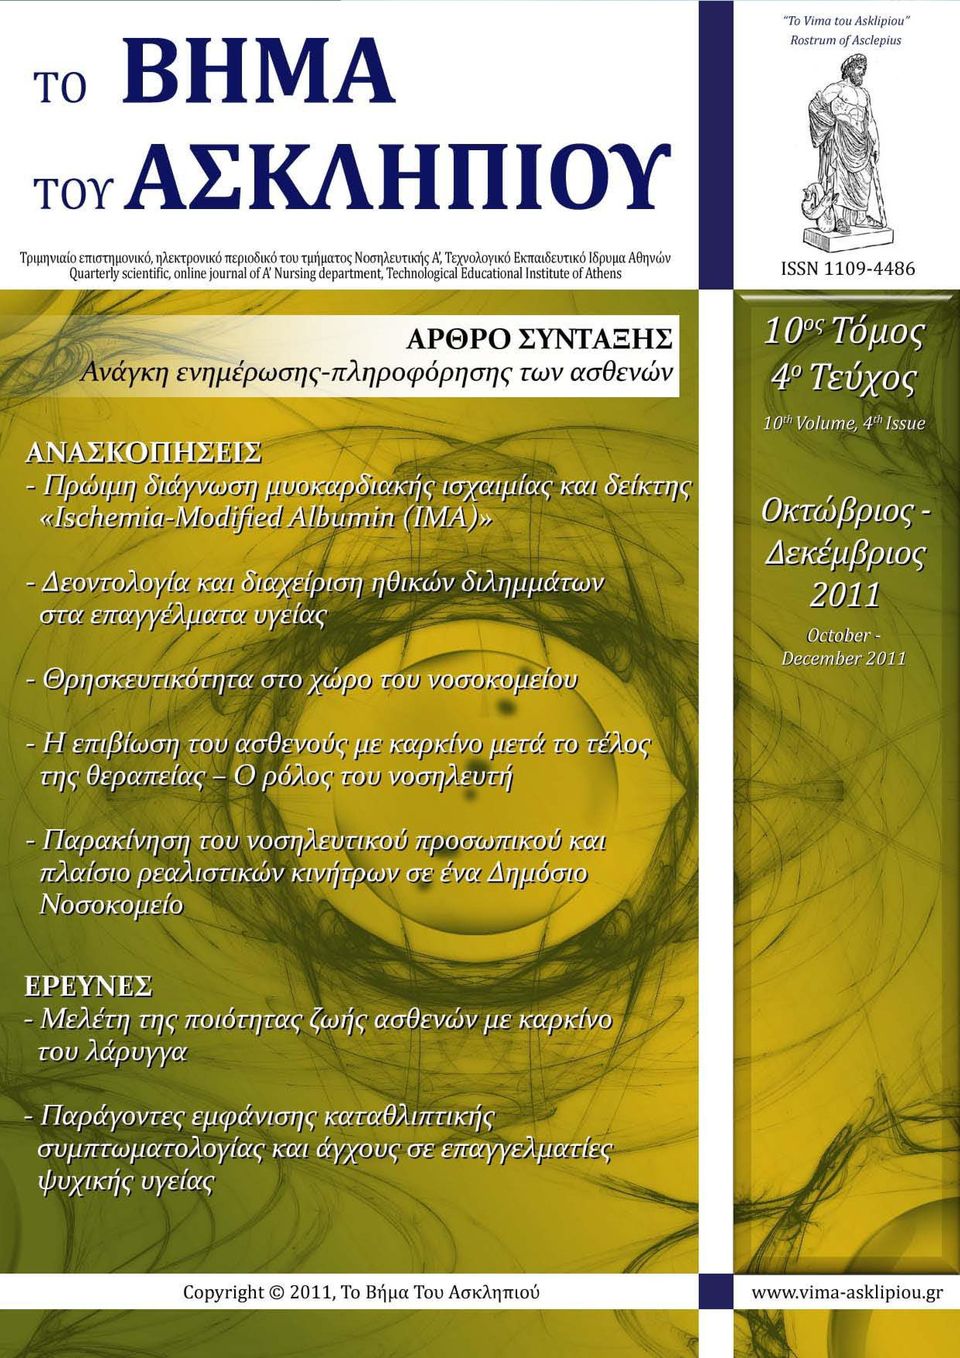 Asclepius 10 th Volume, 4 th Issue, October